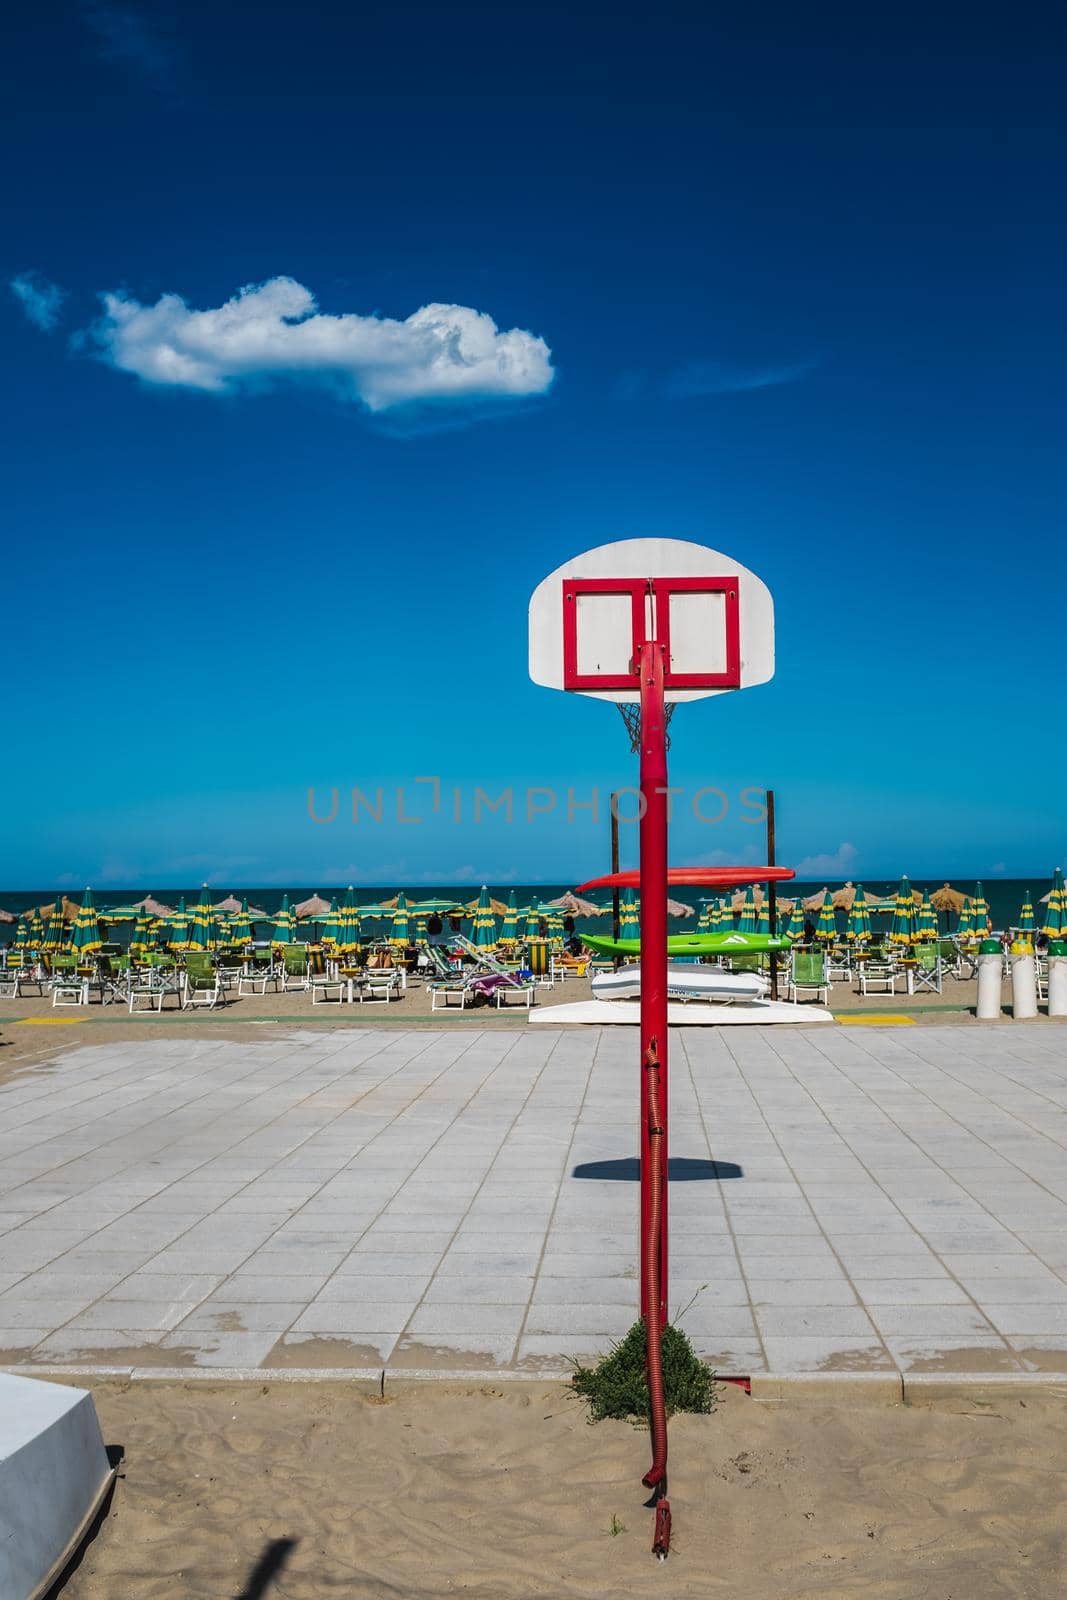 Pescara, Italy: rear view of a basketball hoop by beach. Bright colors in a summer day.